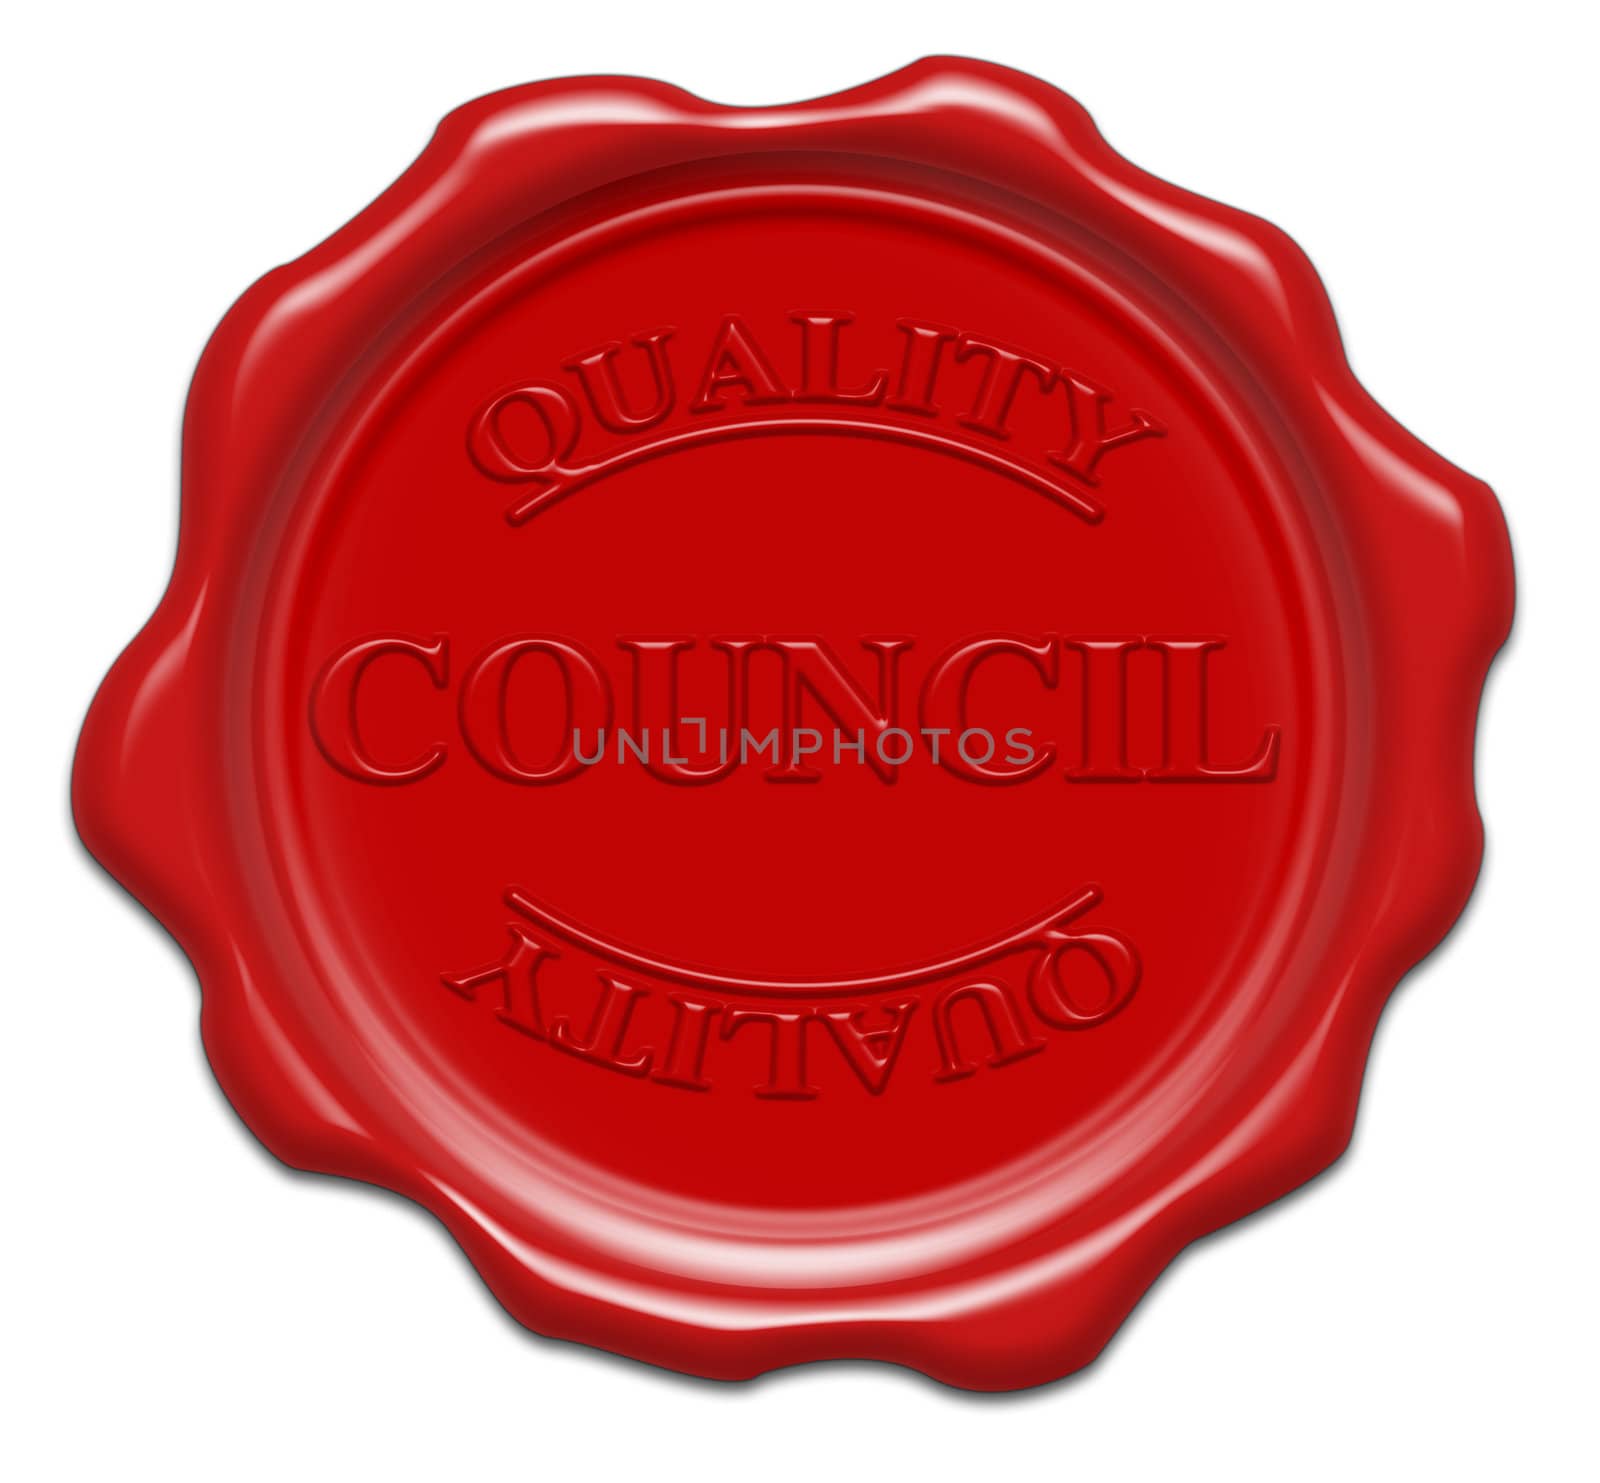 quality council - illustration red wax seal isolated on white ba by mozzyb